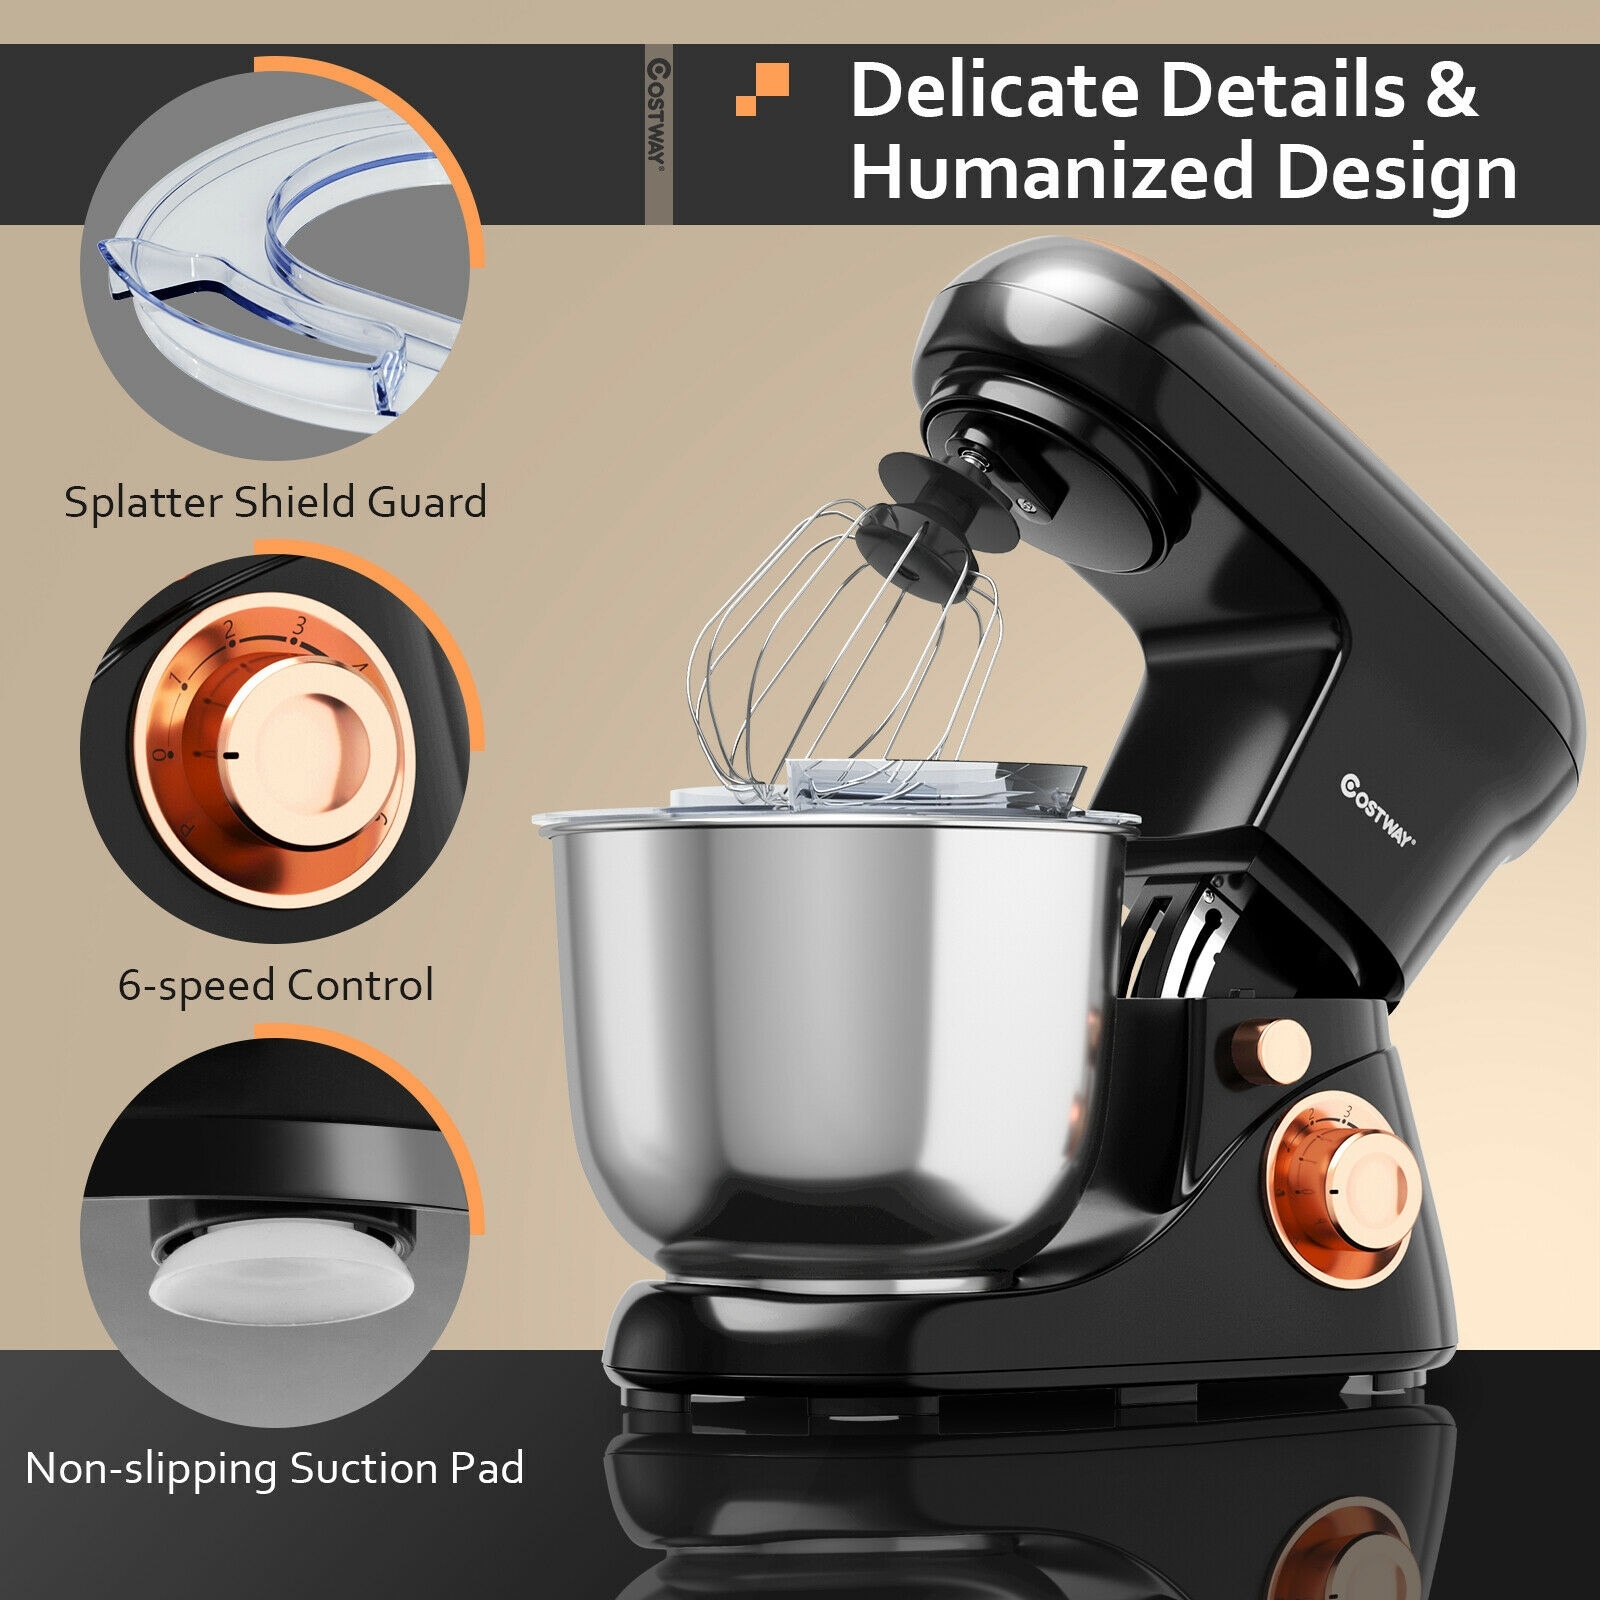 GZMR 5.3-Quart 6-Speed Black Residential Stand Mixer in the Stand